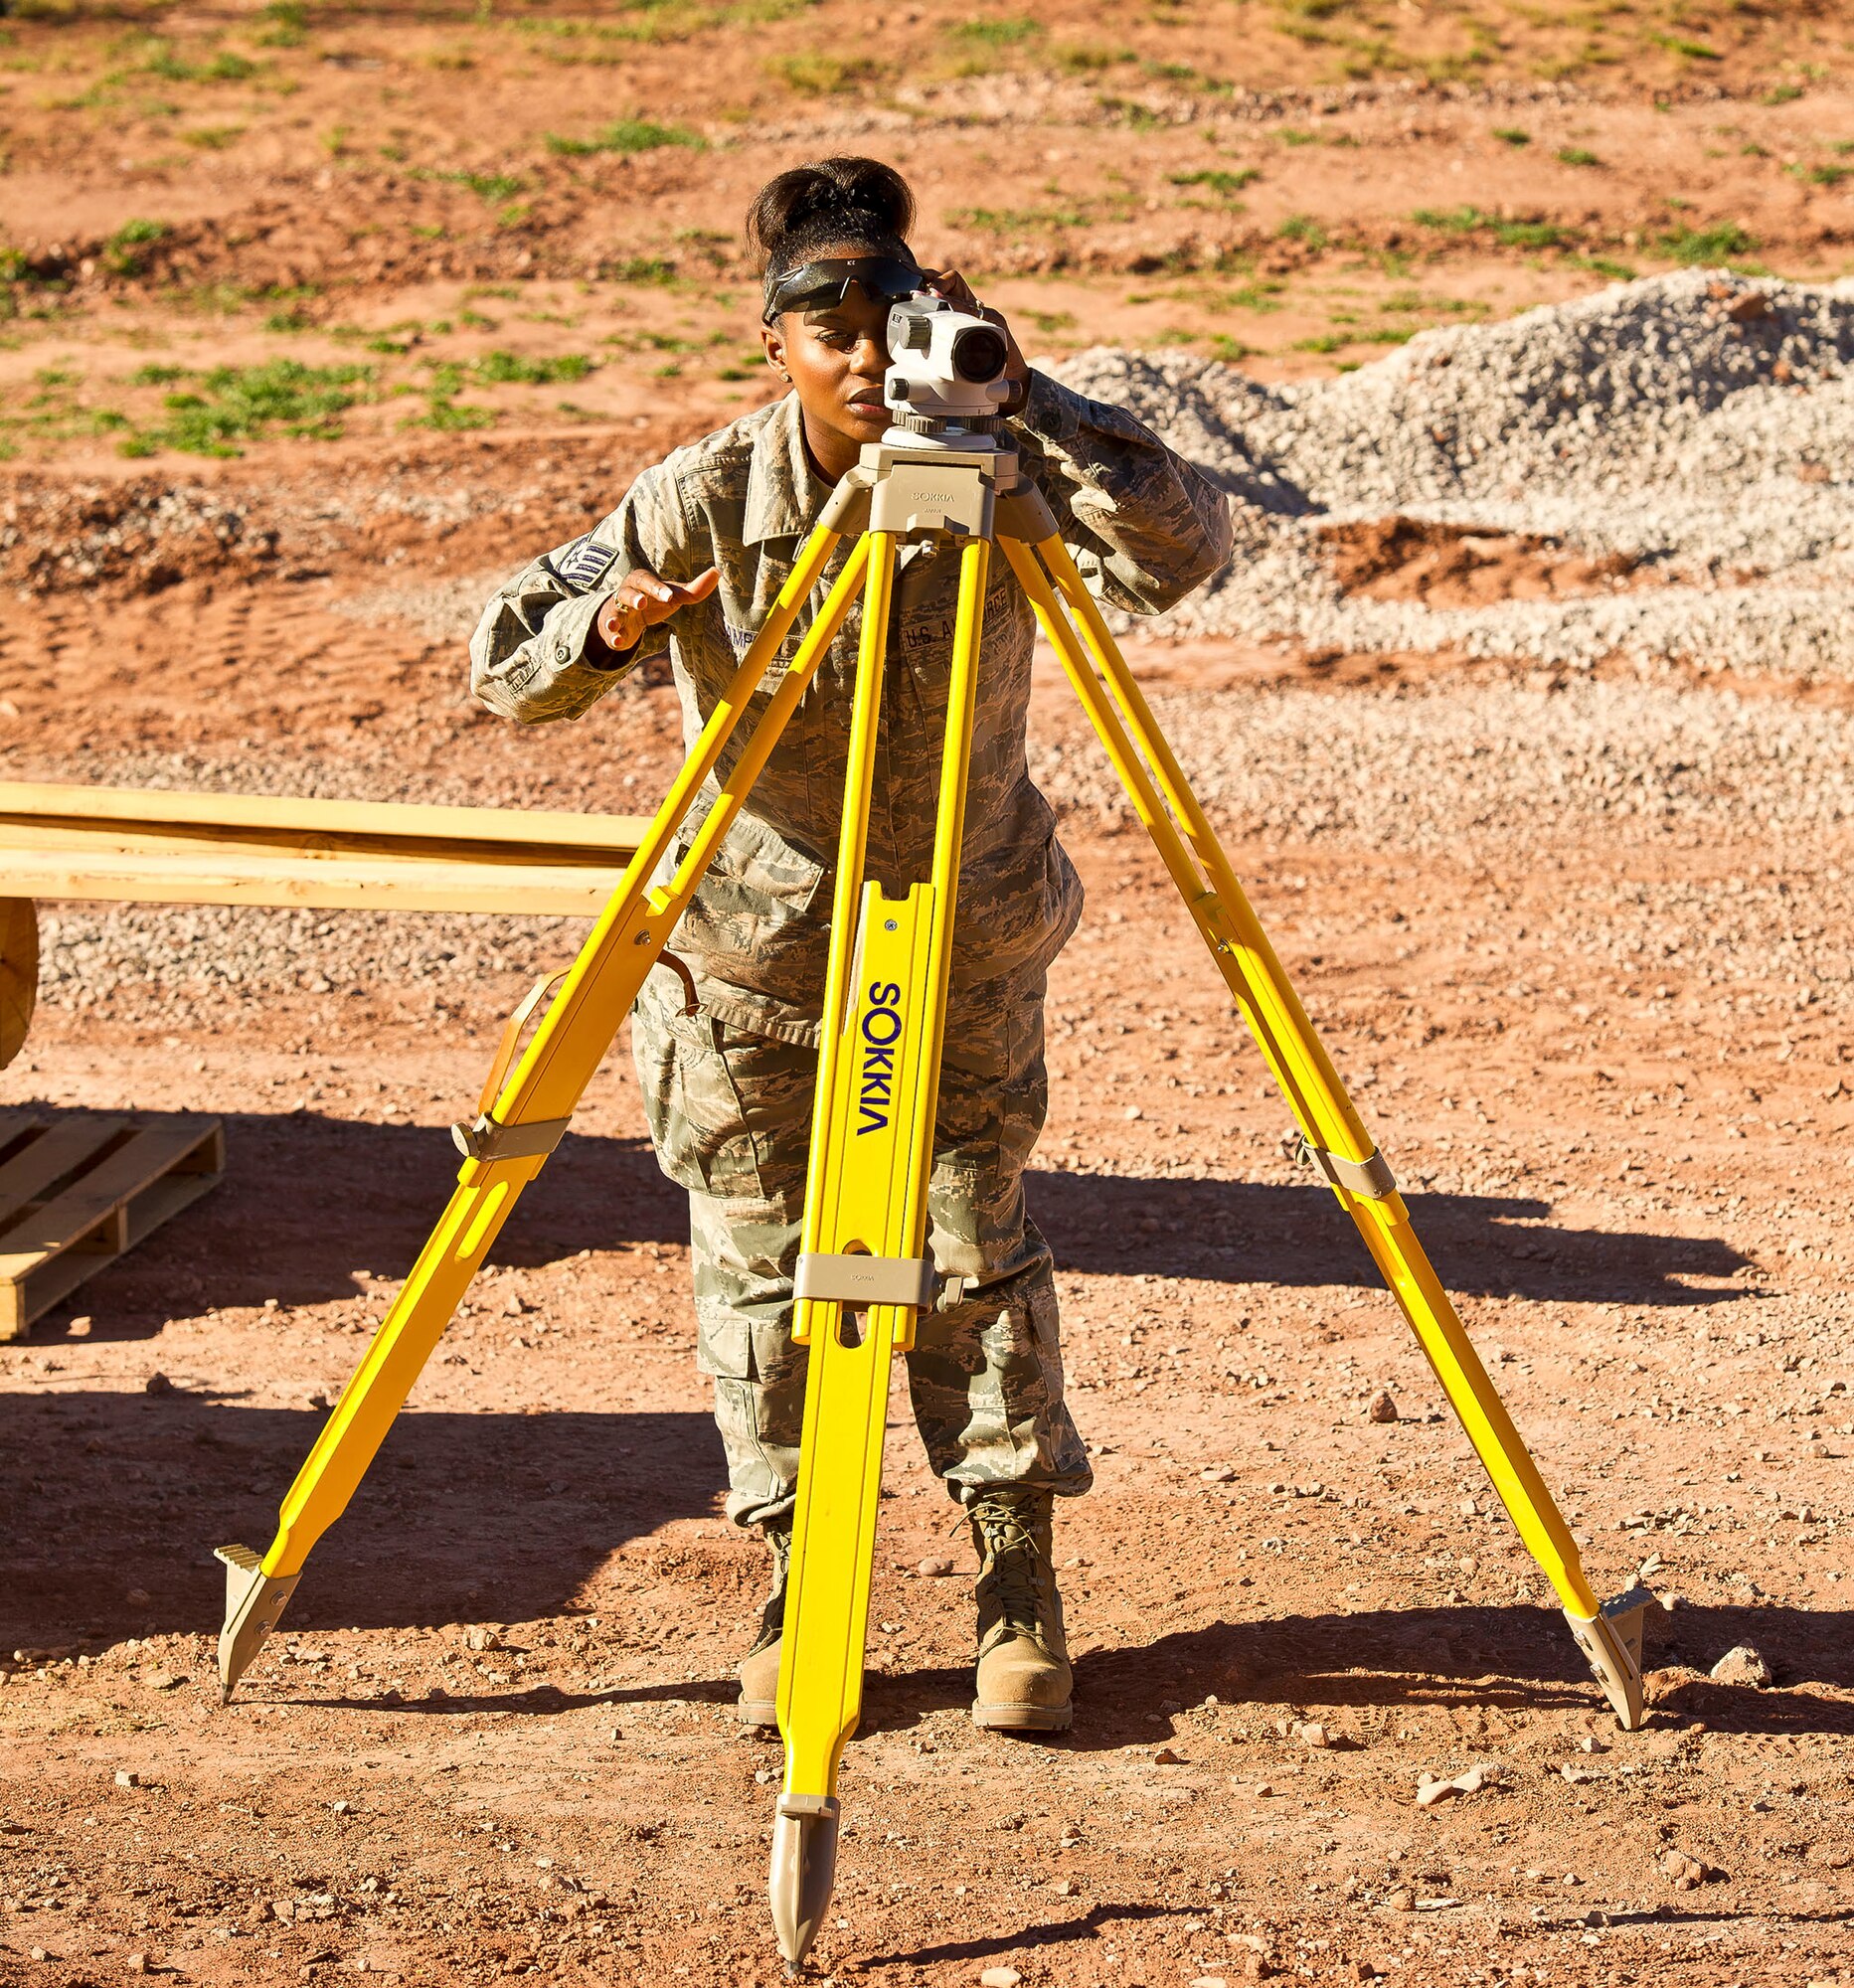 Staff Sgt. Tina Sampson, 116th Civil Engineering Squadron, Robins Air Force Base, Ga., uses an auto level to get an accurate measurement for construction of a new sidewalk  at St. Michaels Association for Special Education, Window Rock, Ariz., June 8, 2011.  Sampson, an Engineering Assistant, and more than 40 members of her squadron deployed to the Navajo Nation as part of the Department of Defense Innovative Readiness Training program. (U.S. Air Force photo by Master Sgt. Roger Parsons/Released)